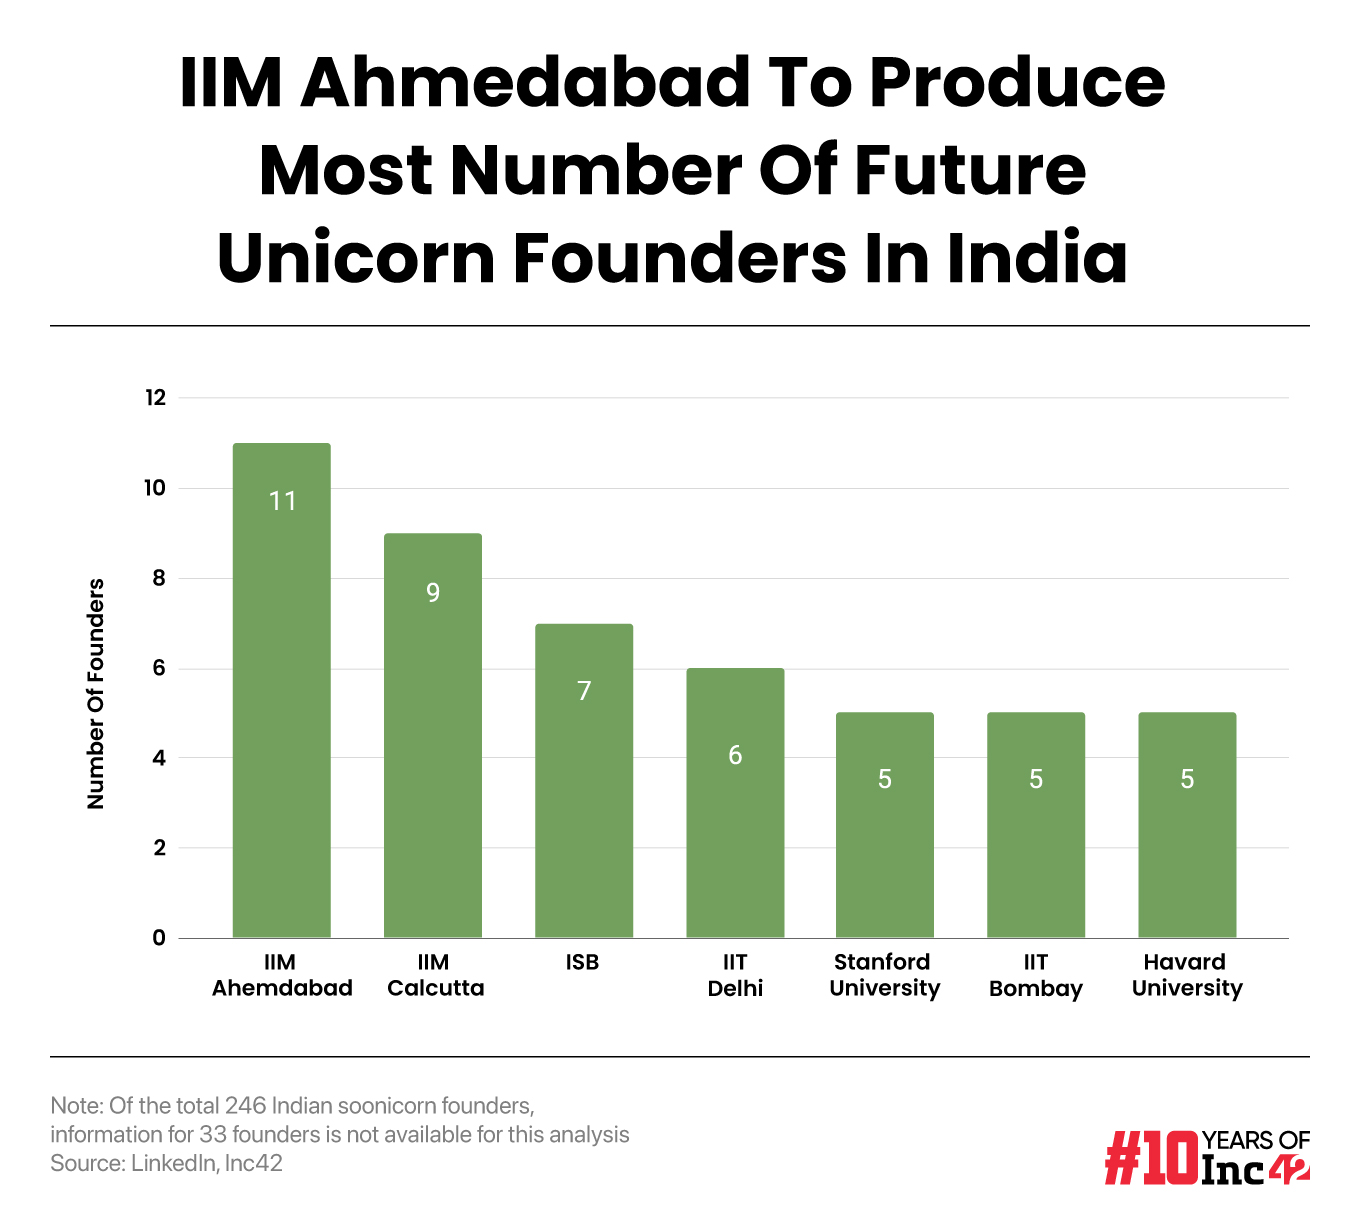 The Inc42 report projects that IIM Ahmedabad will produce the highest number of future unicorn founders in India.